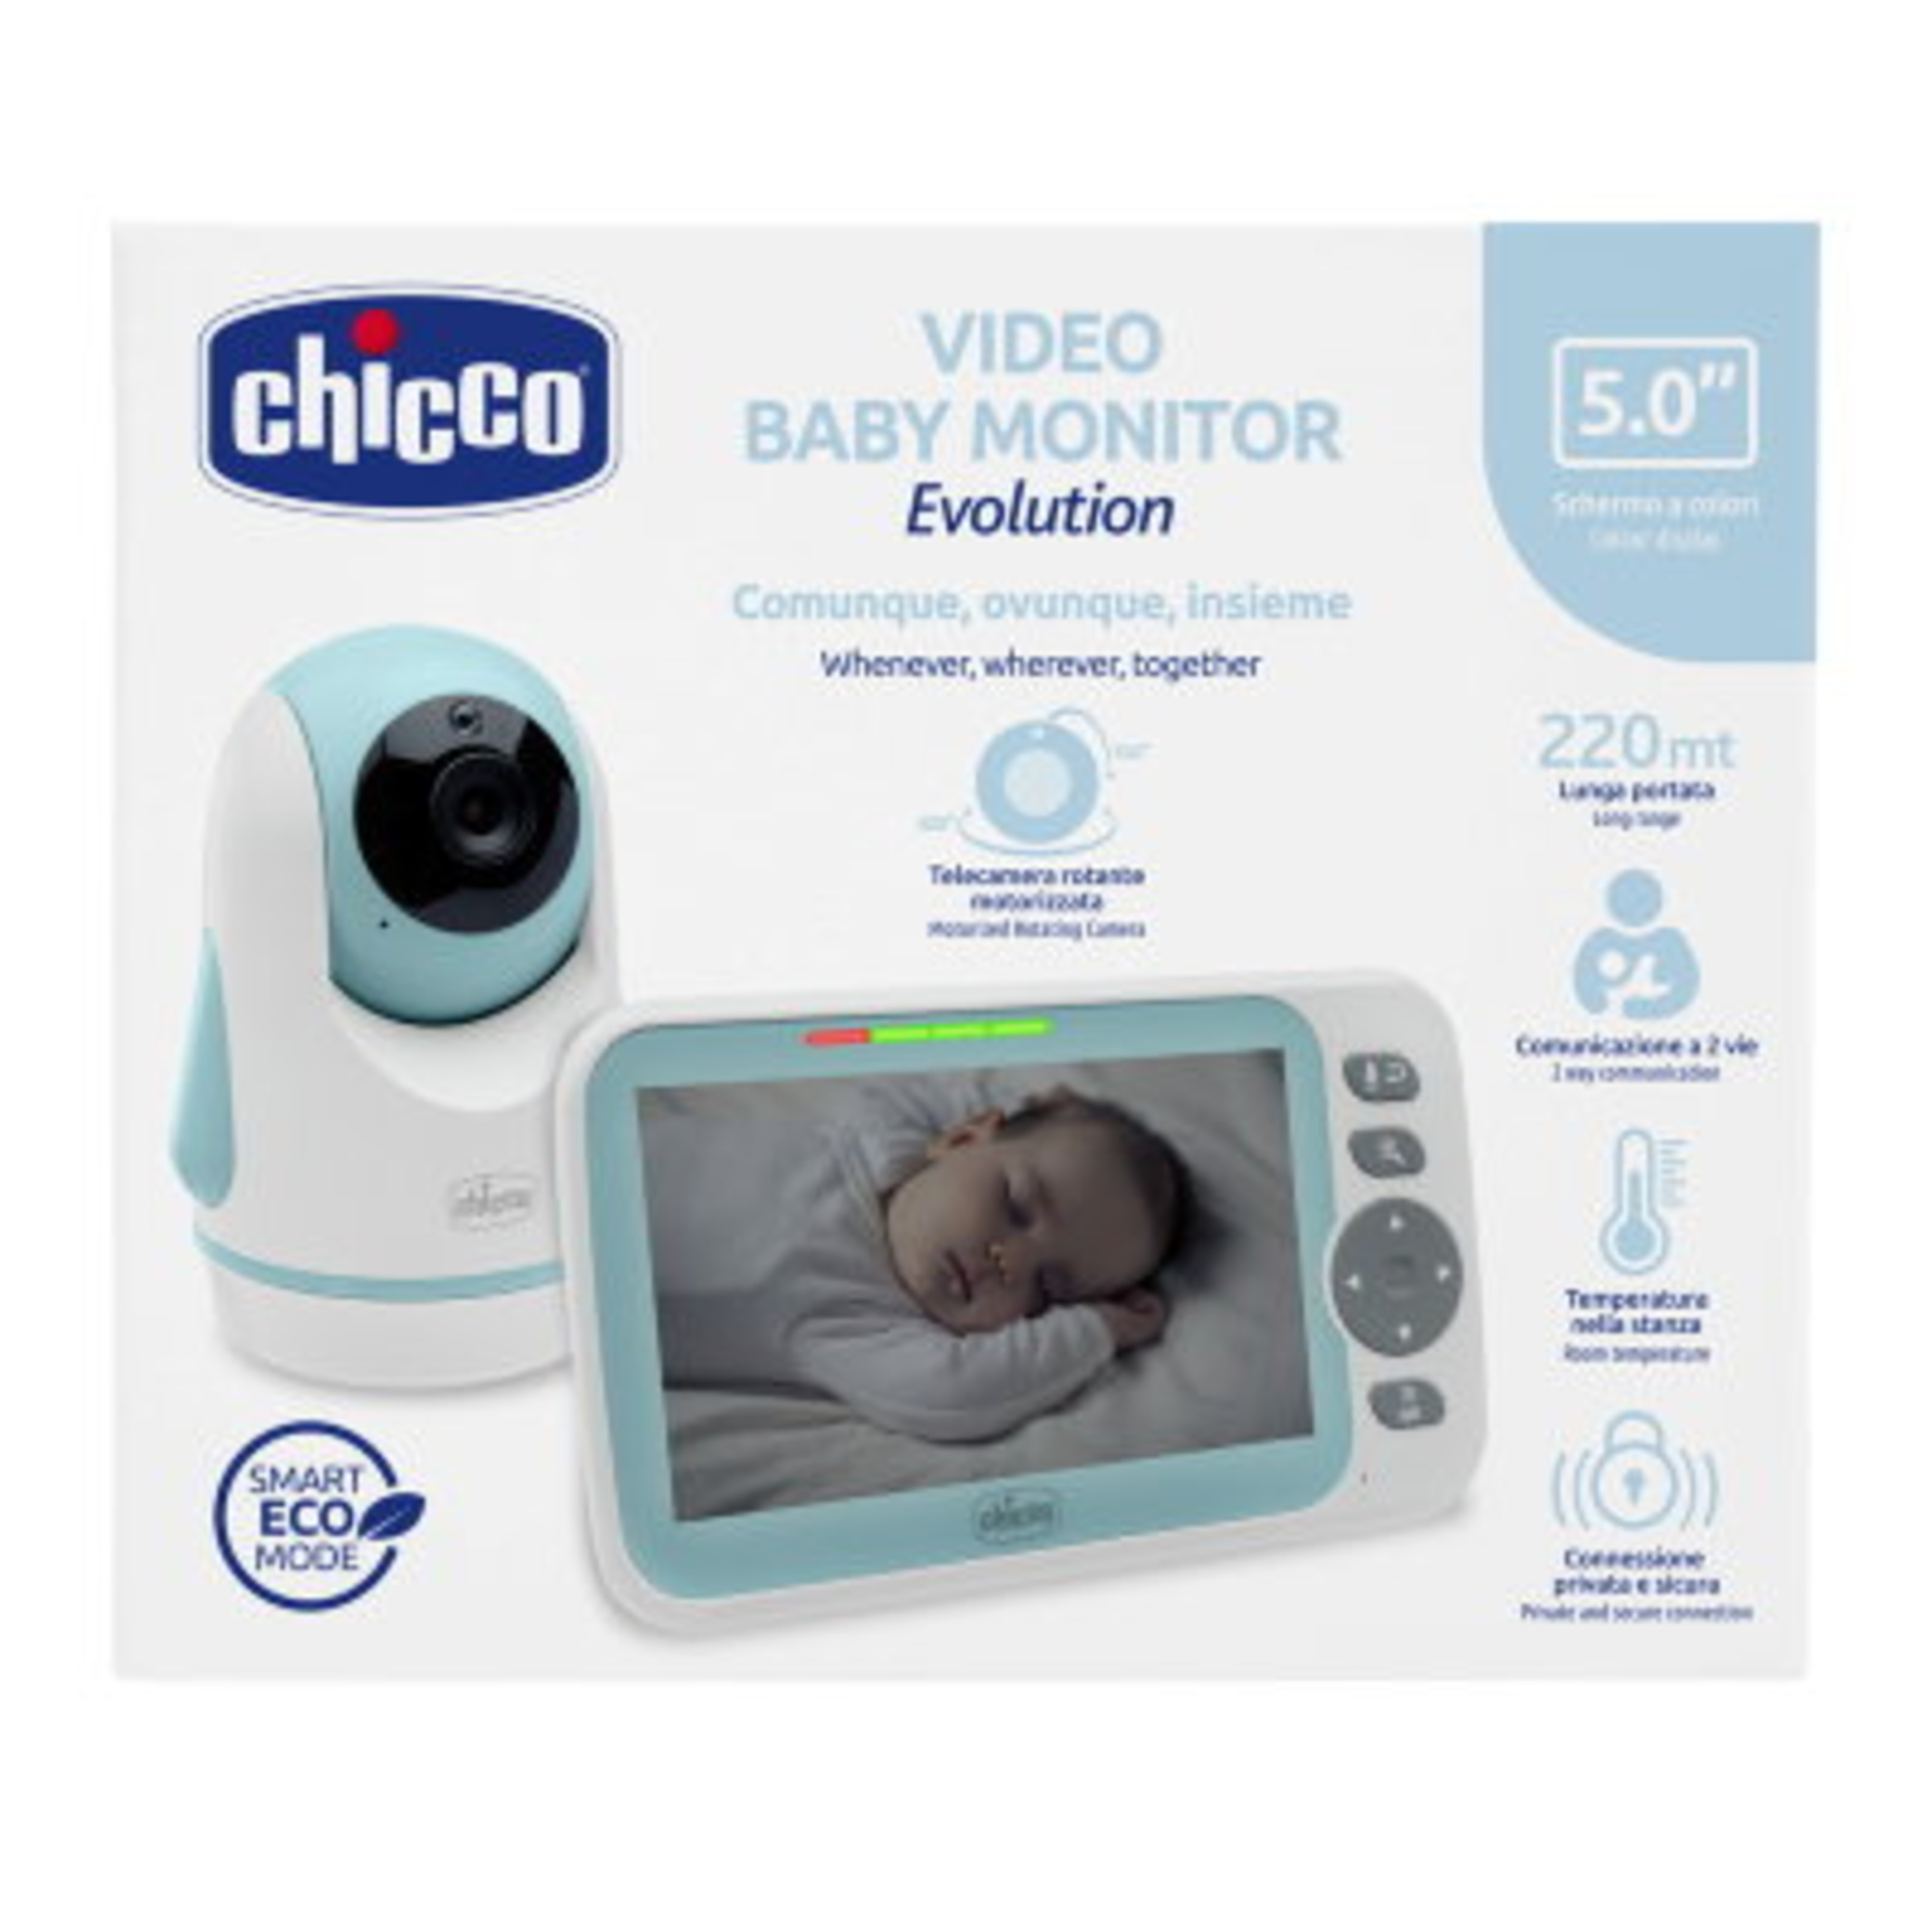 Chicco video baby monitor evolution 5" - Chicco